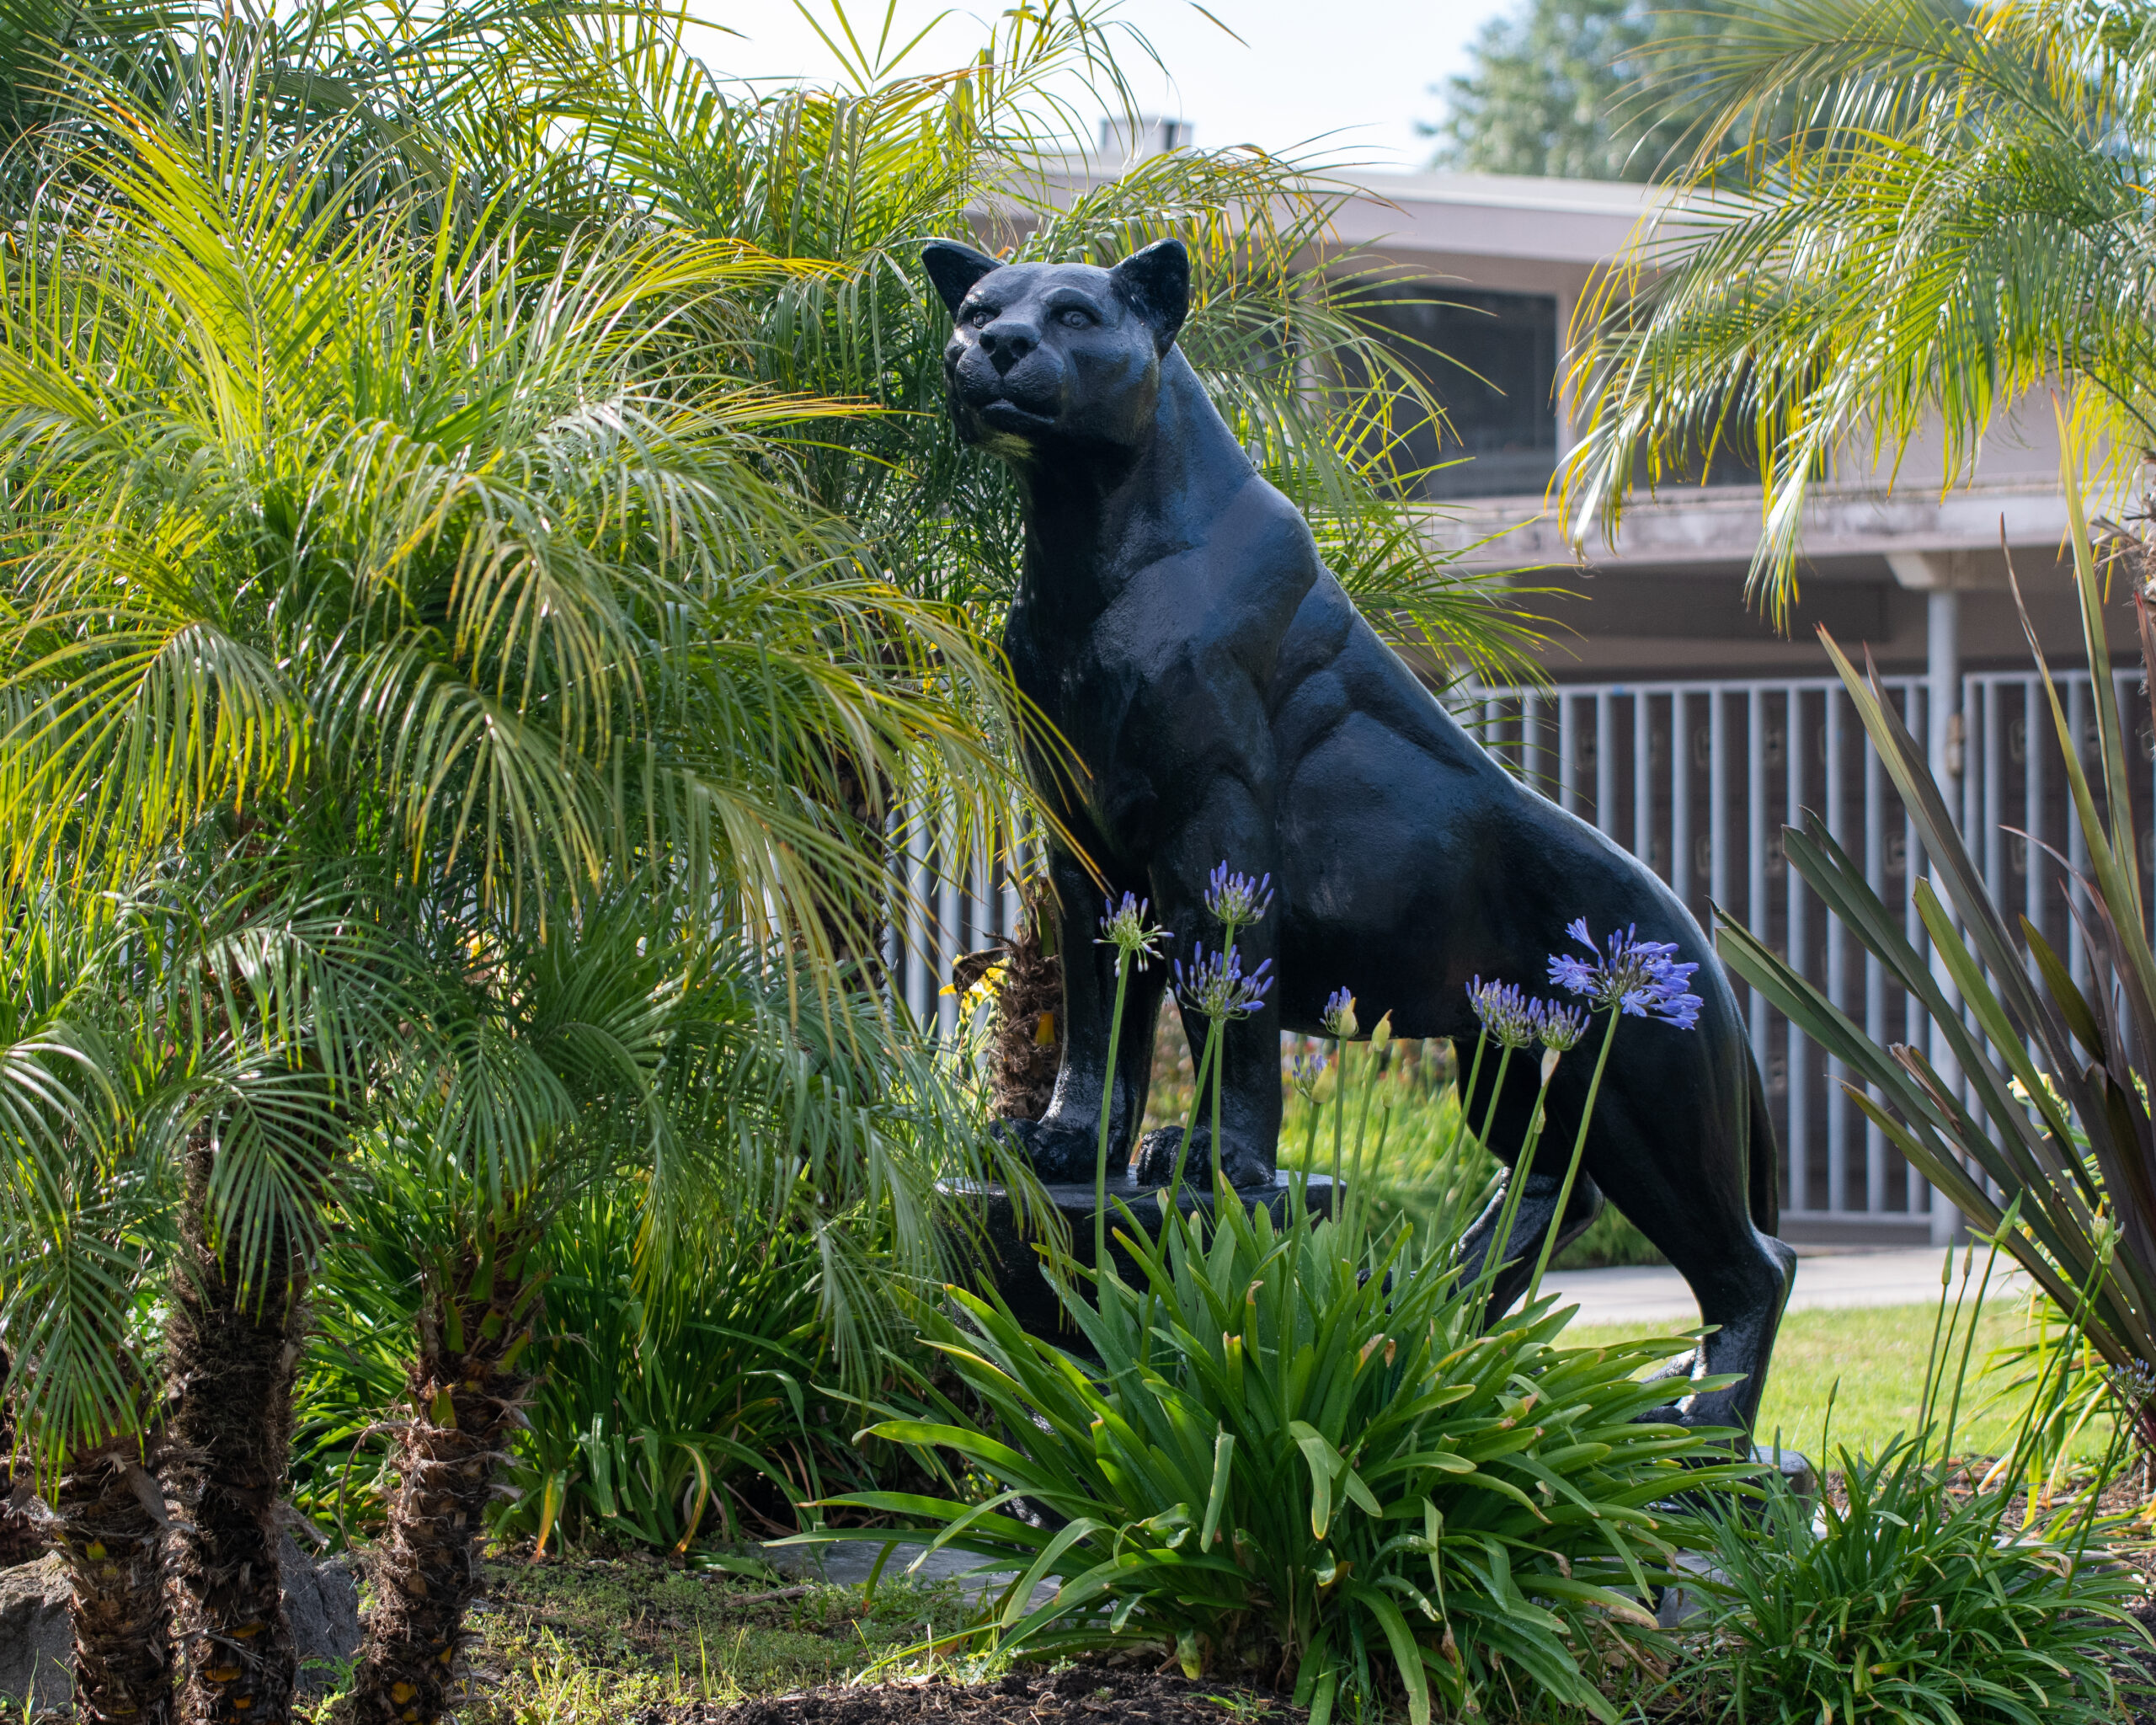 Statue of school mascot, a panther